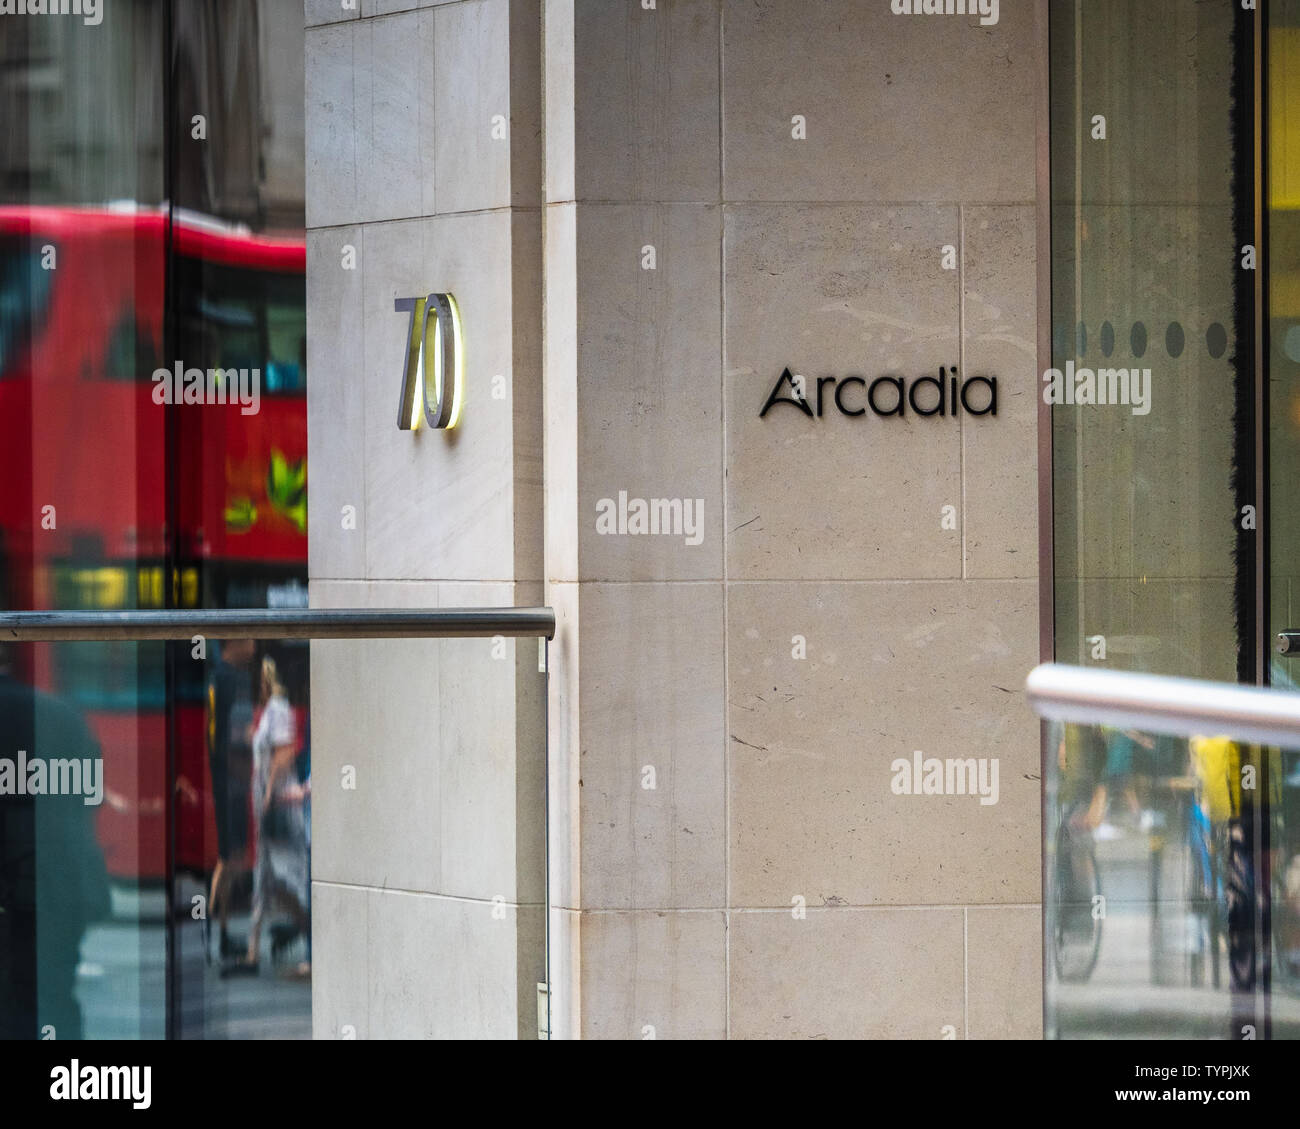 Arcadia Plc Group HQ Headquarters London - Headquarters of the Arcadia Group retail company at Colegrave House in Berners Street, Fitzrovia London. Stock Photo